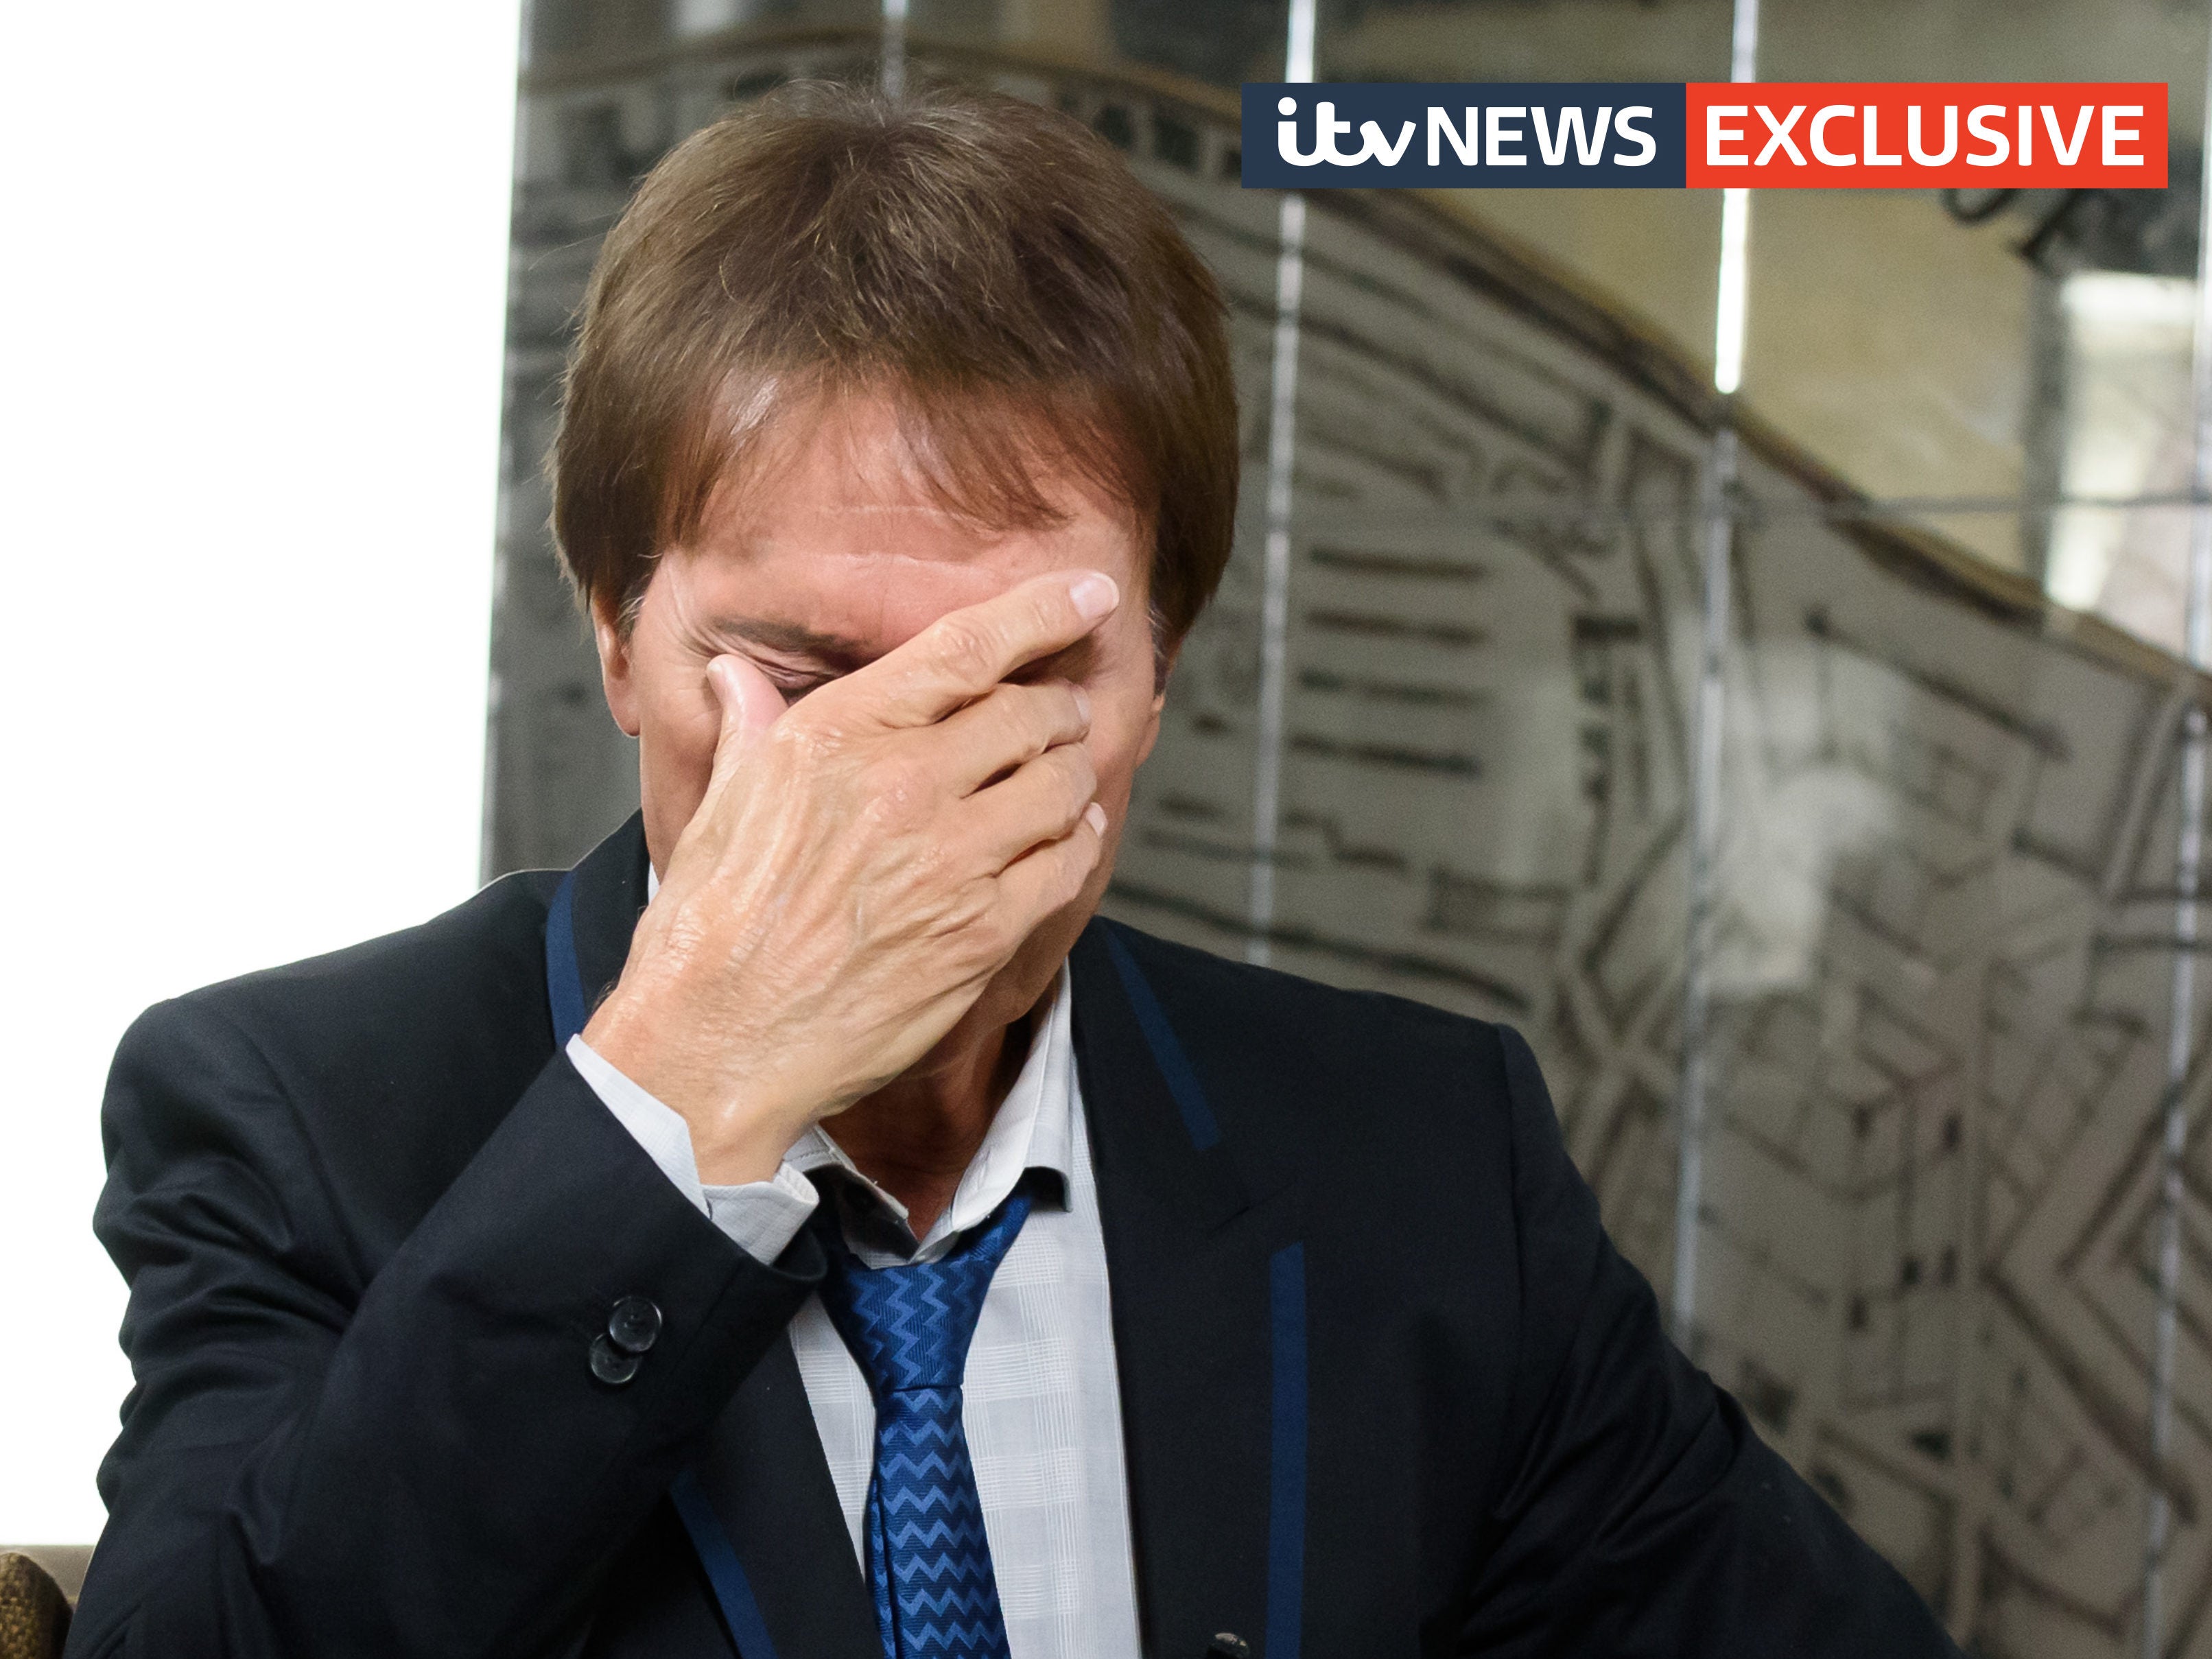 Sir Cliff Richard tells ITV News: 'If heads roll at the BBC, maybe it's because it's deserved'